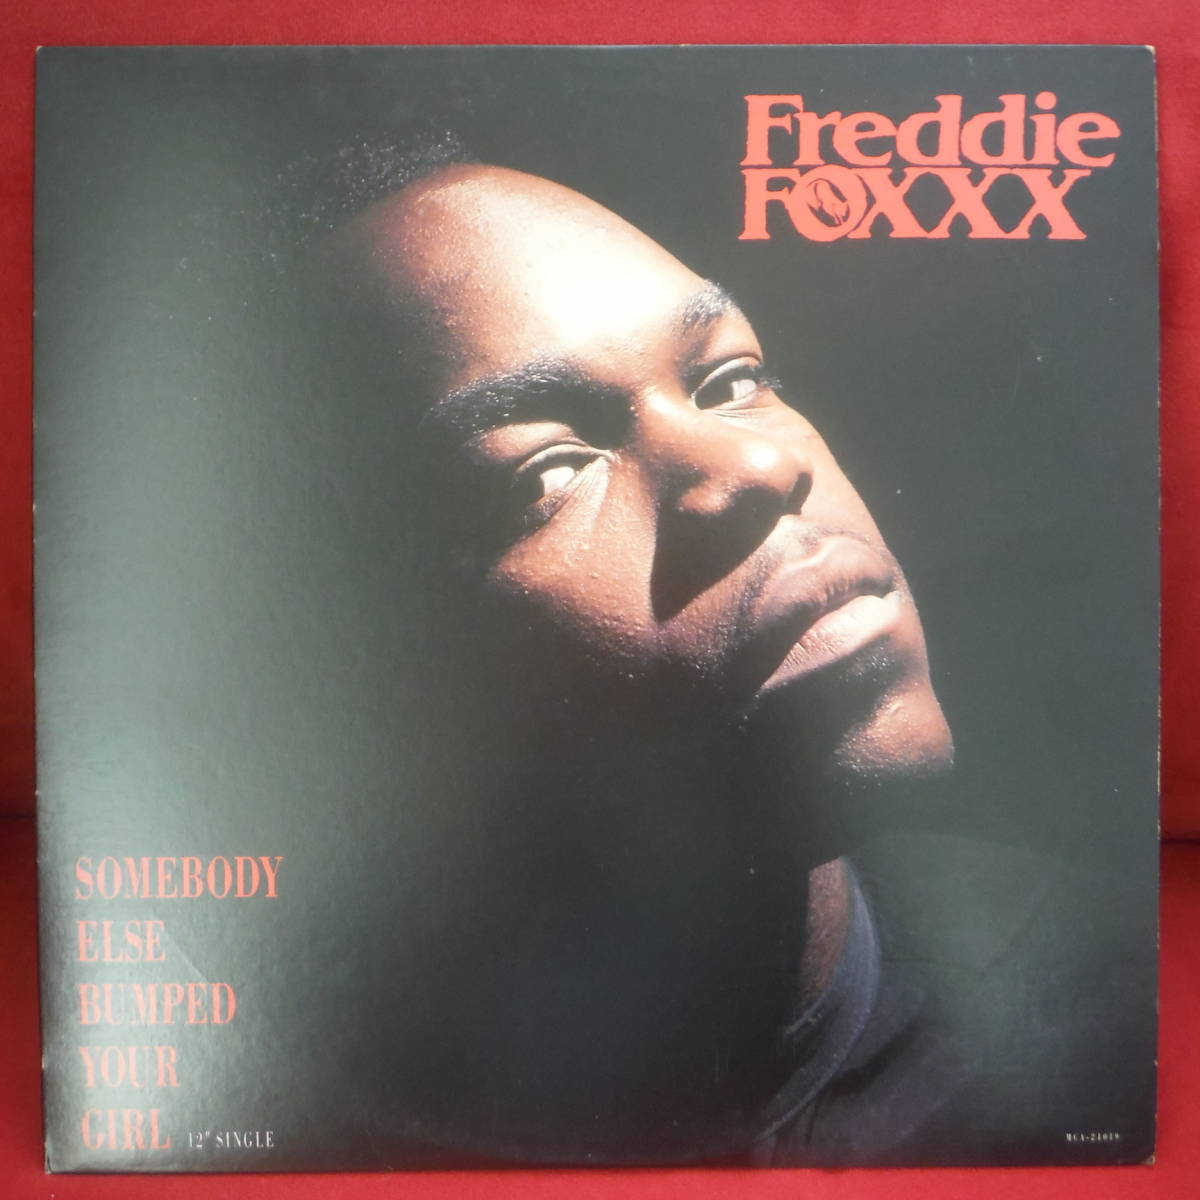 Freddie Foxxx / Somebody Else Bumped Your Girl 12"Remix 12インチ　ヒップホップ HIPHOP 激レア_画像1